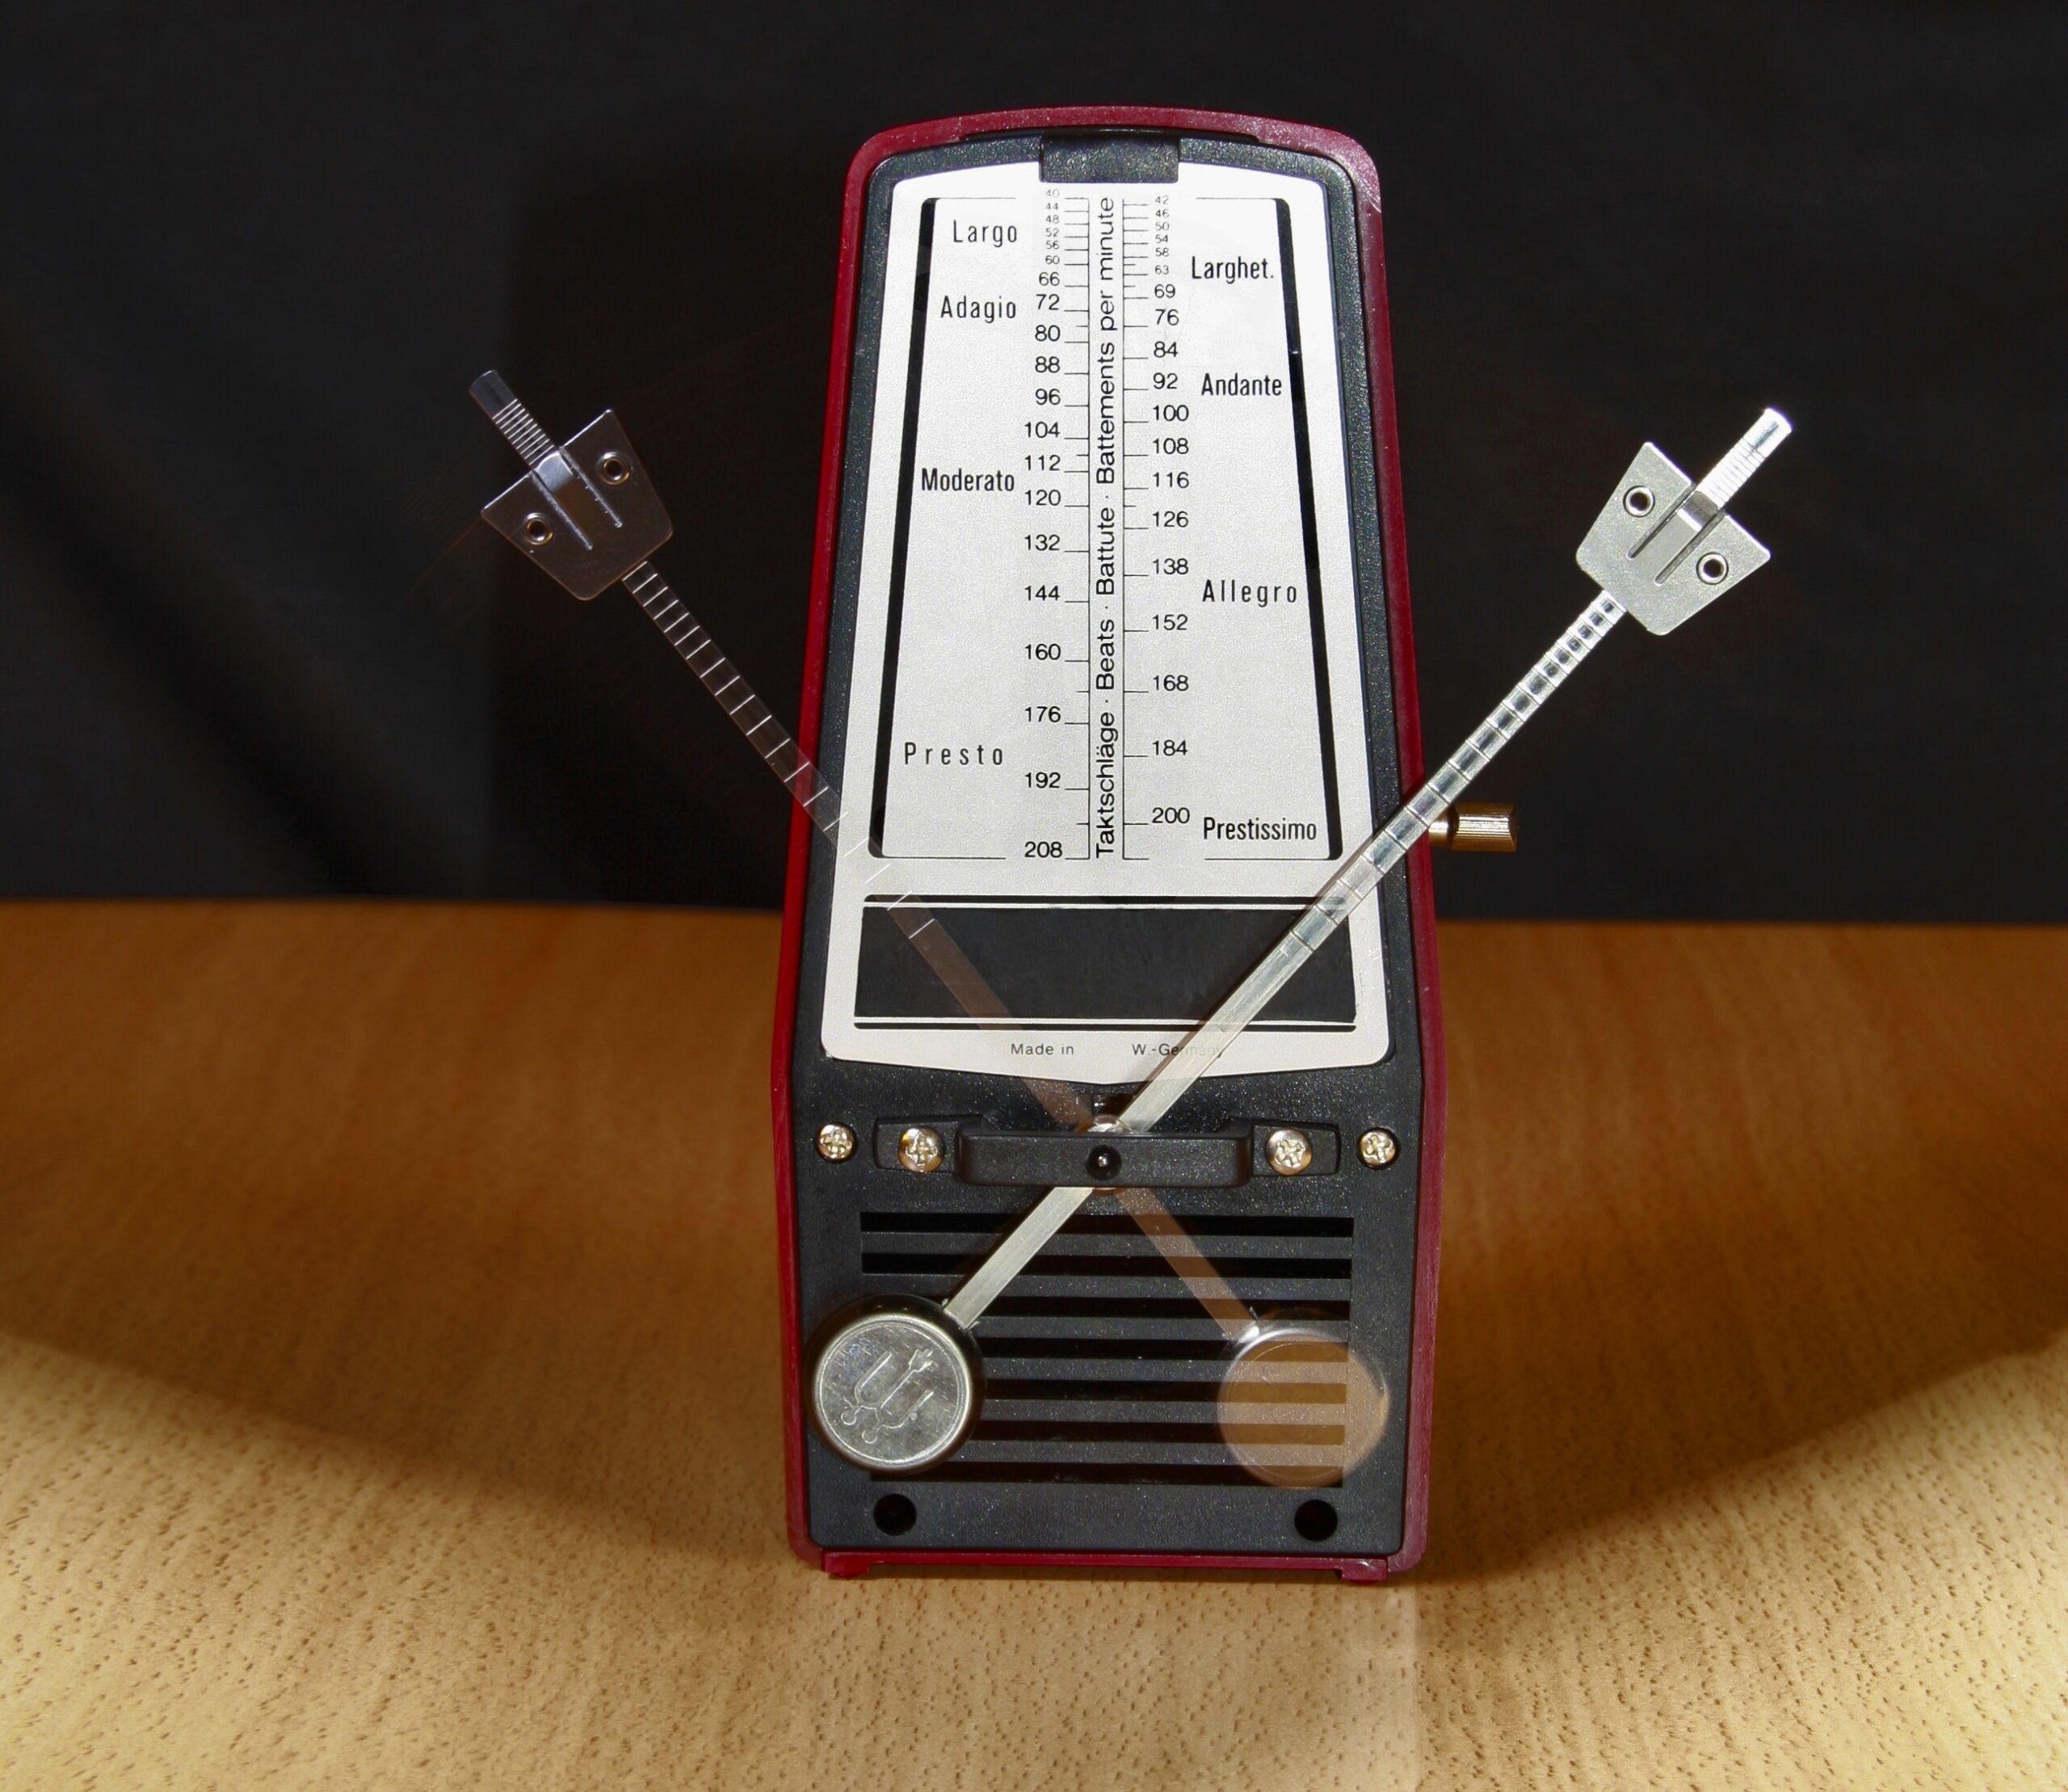 Why the Metronome is Important: Practising to a click